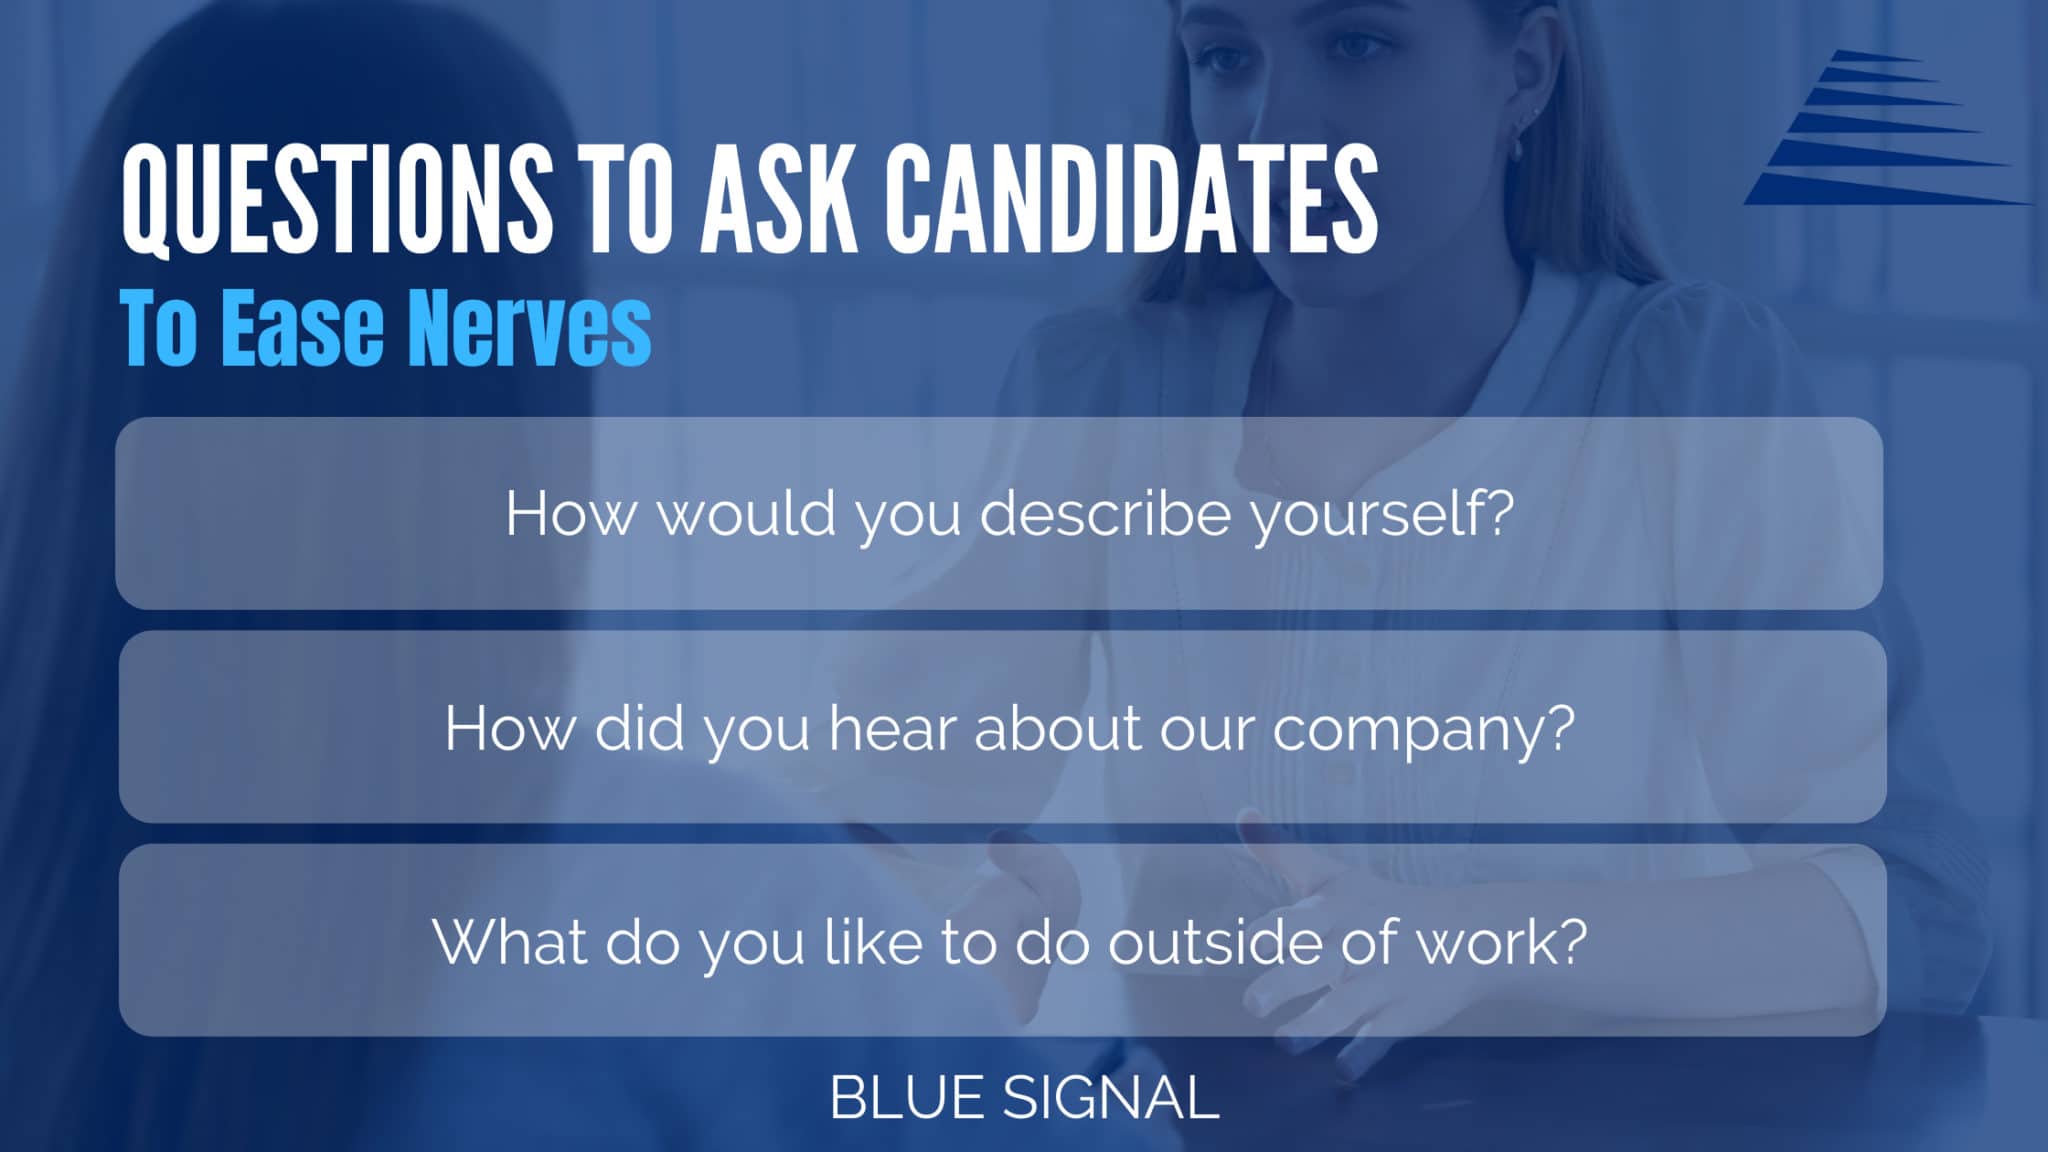 Graphic displaying questions to ask candidates to ease nerves in bad interviews